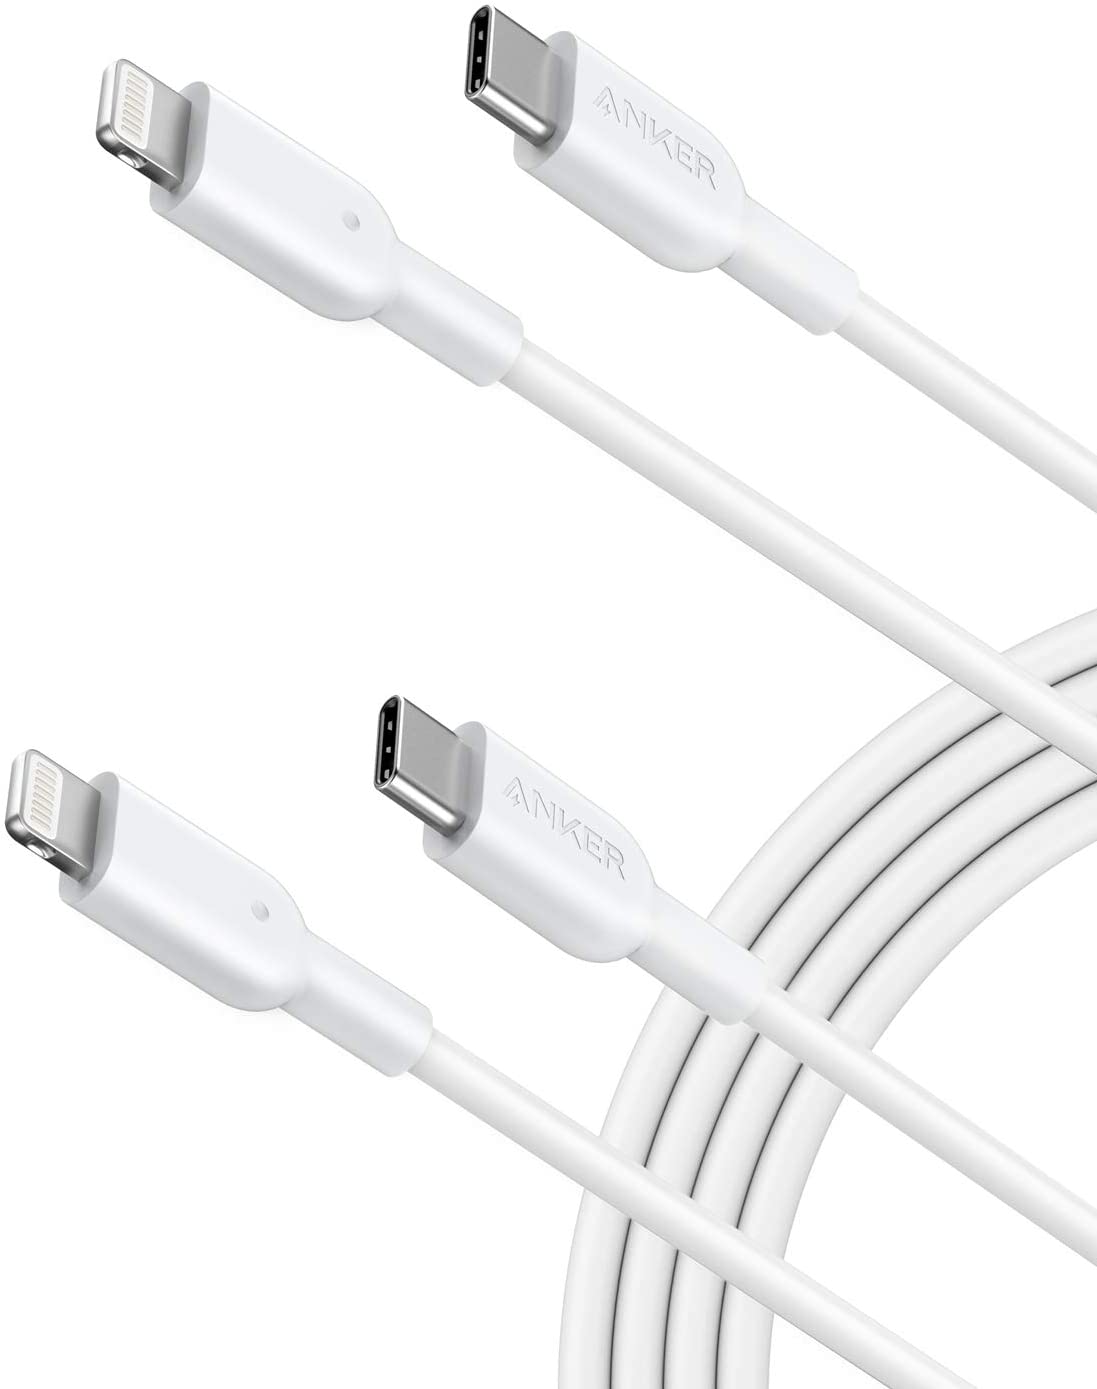 Deal of the day: Save 39% OFF on Anker USB C to Lightning Cable [6ft, 2-Pack MFi Certified] $19.99